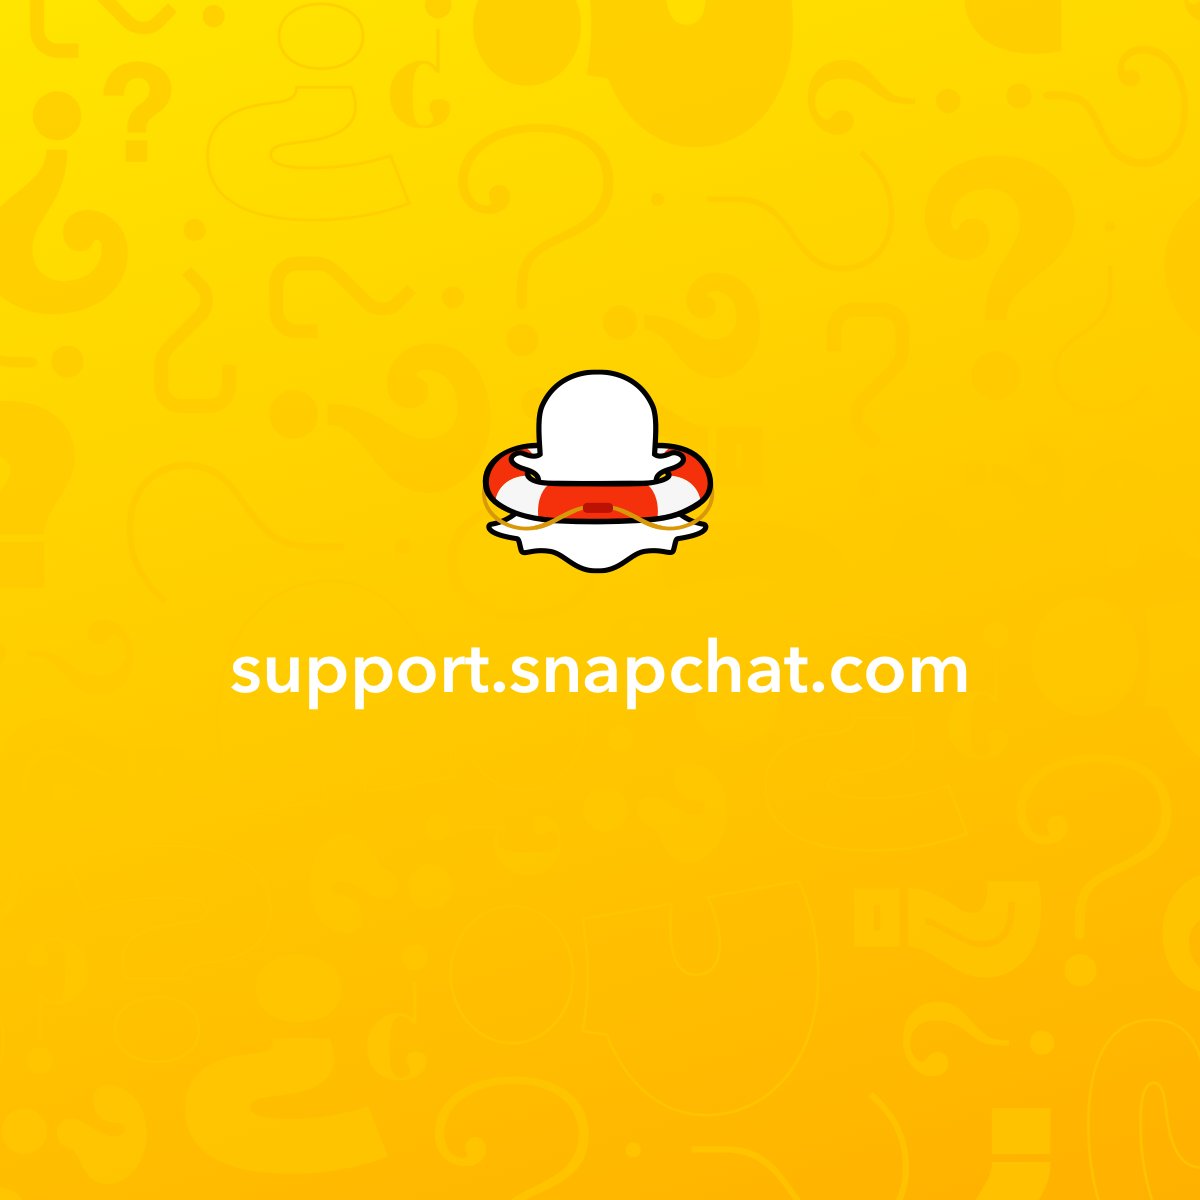 Https //support.snapchat.com/i-need-help snapchat How to